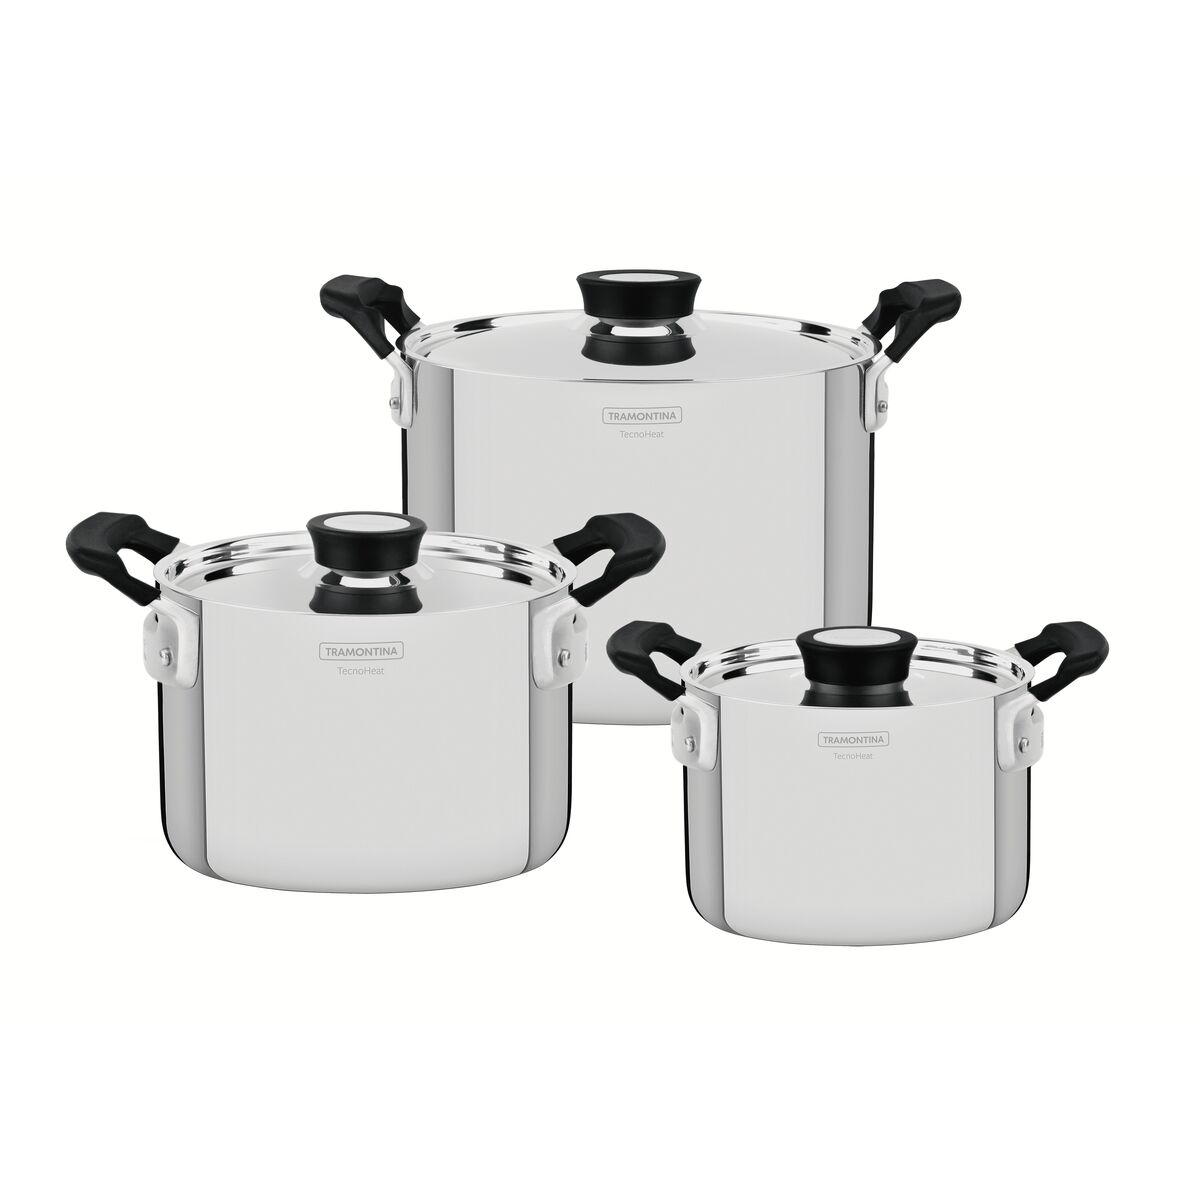 Tramontina Grano Compact 3-Piece Stainless Steel Cookware Set with Triple Body and Black Bakelite Handles